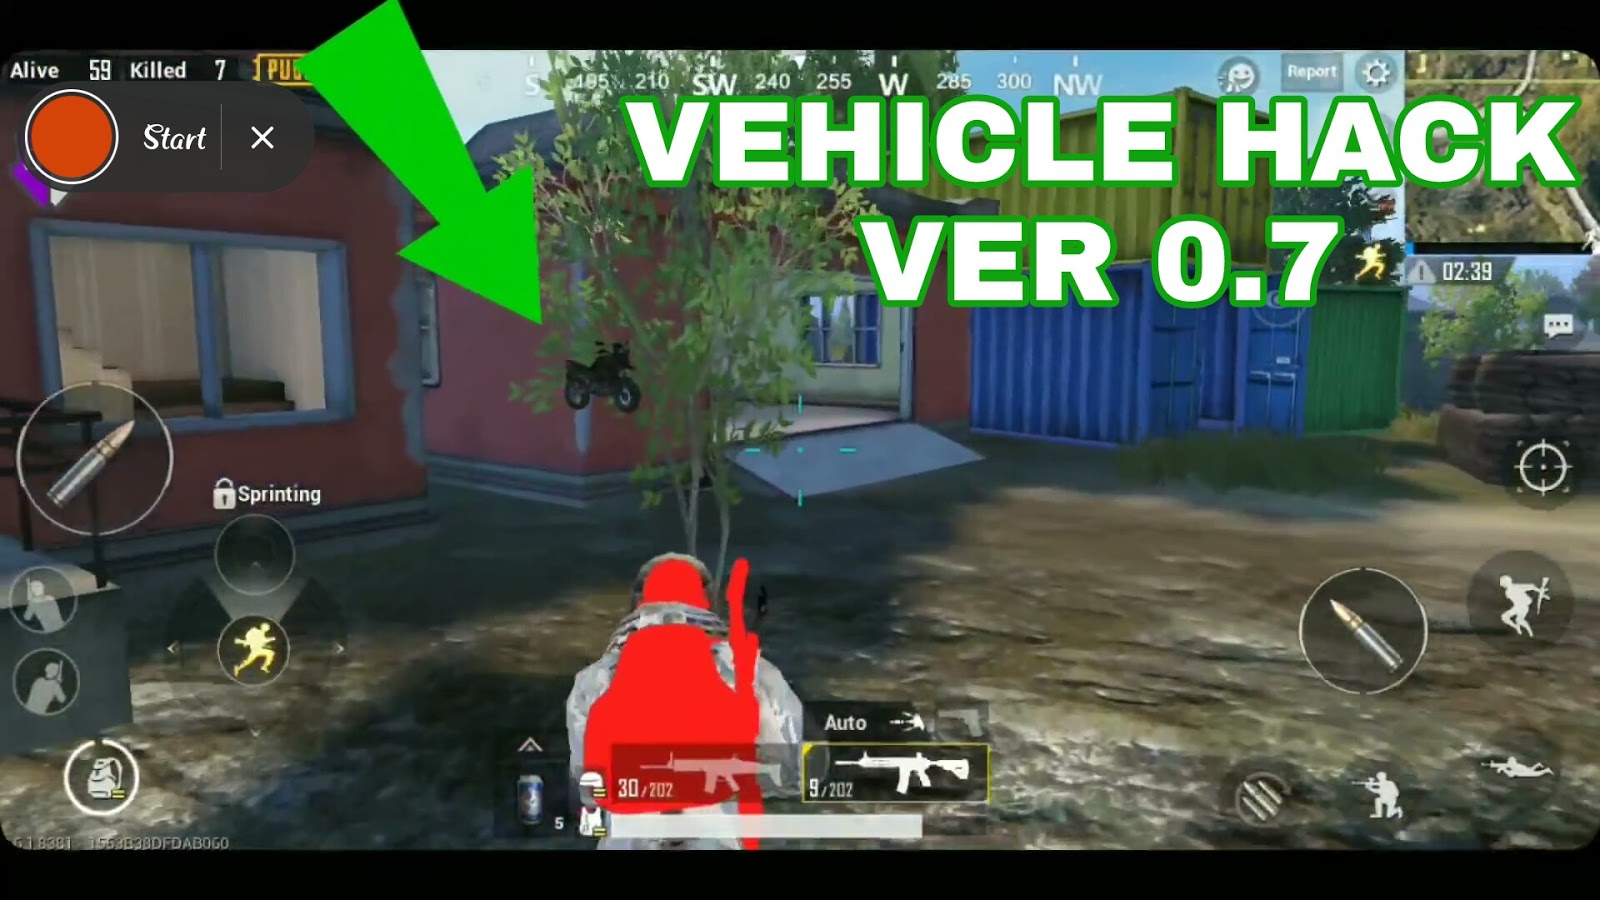 Pubg mobile update Ver.0.7.0 HACKED/Mod apk 2018 Android / iOS ... - 